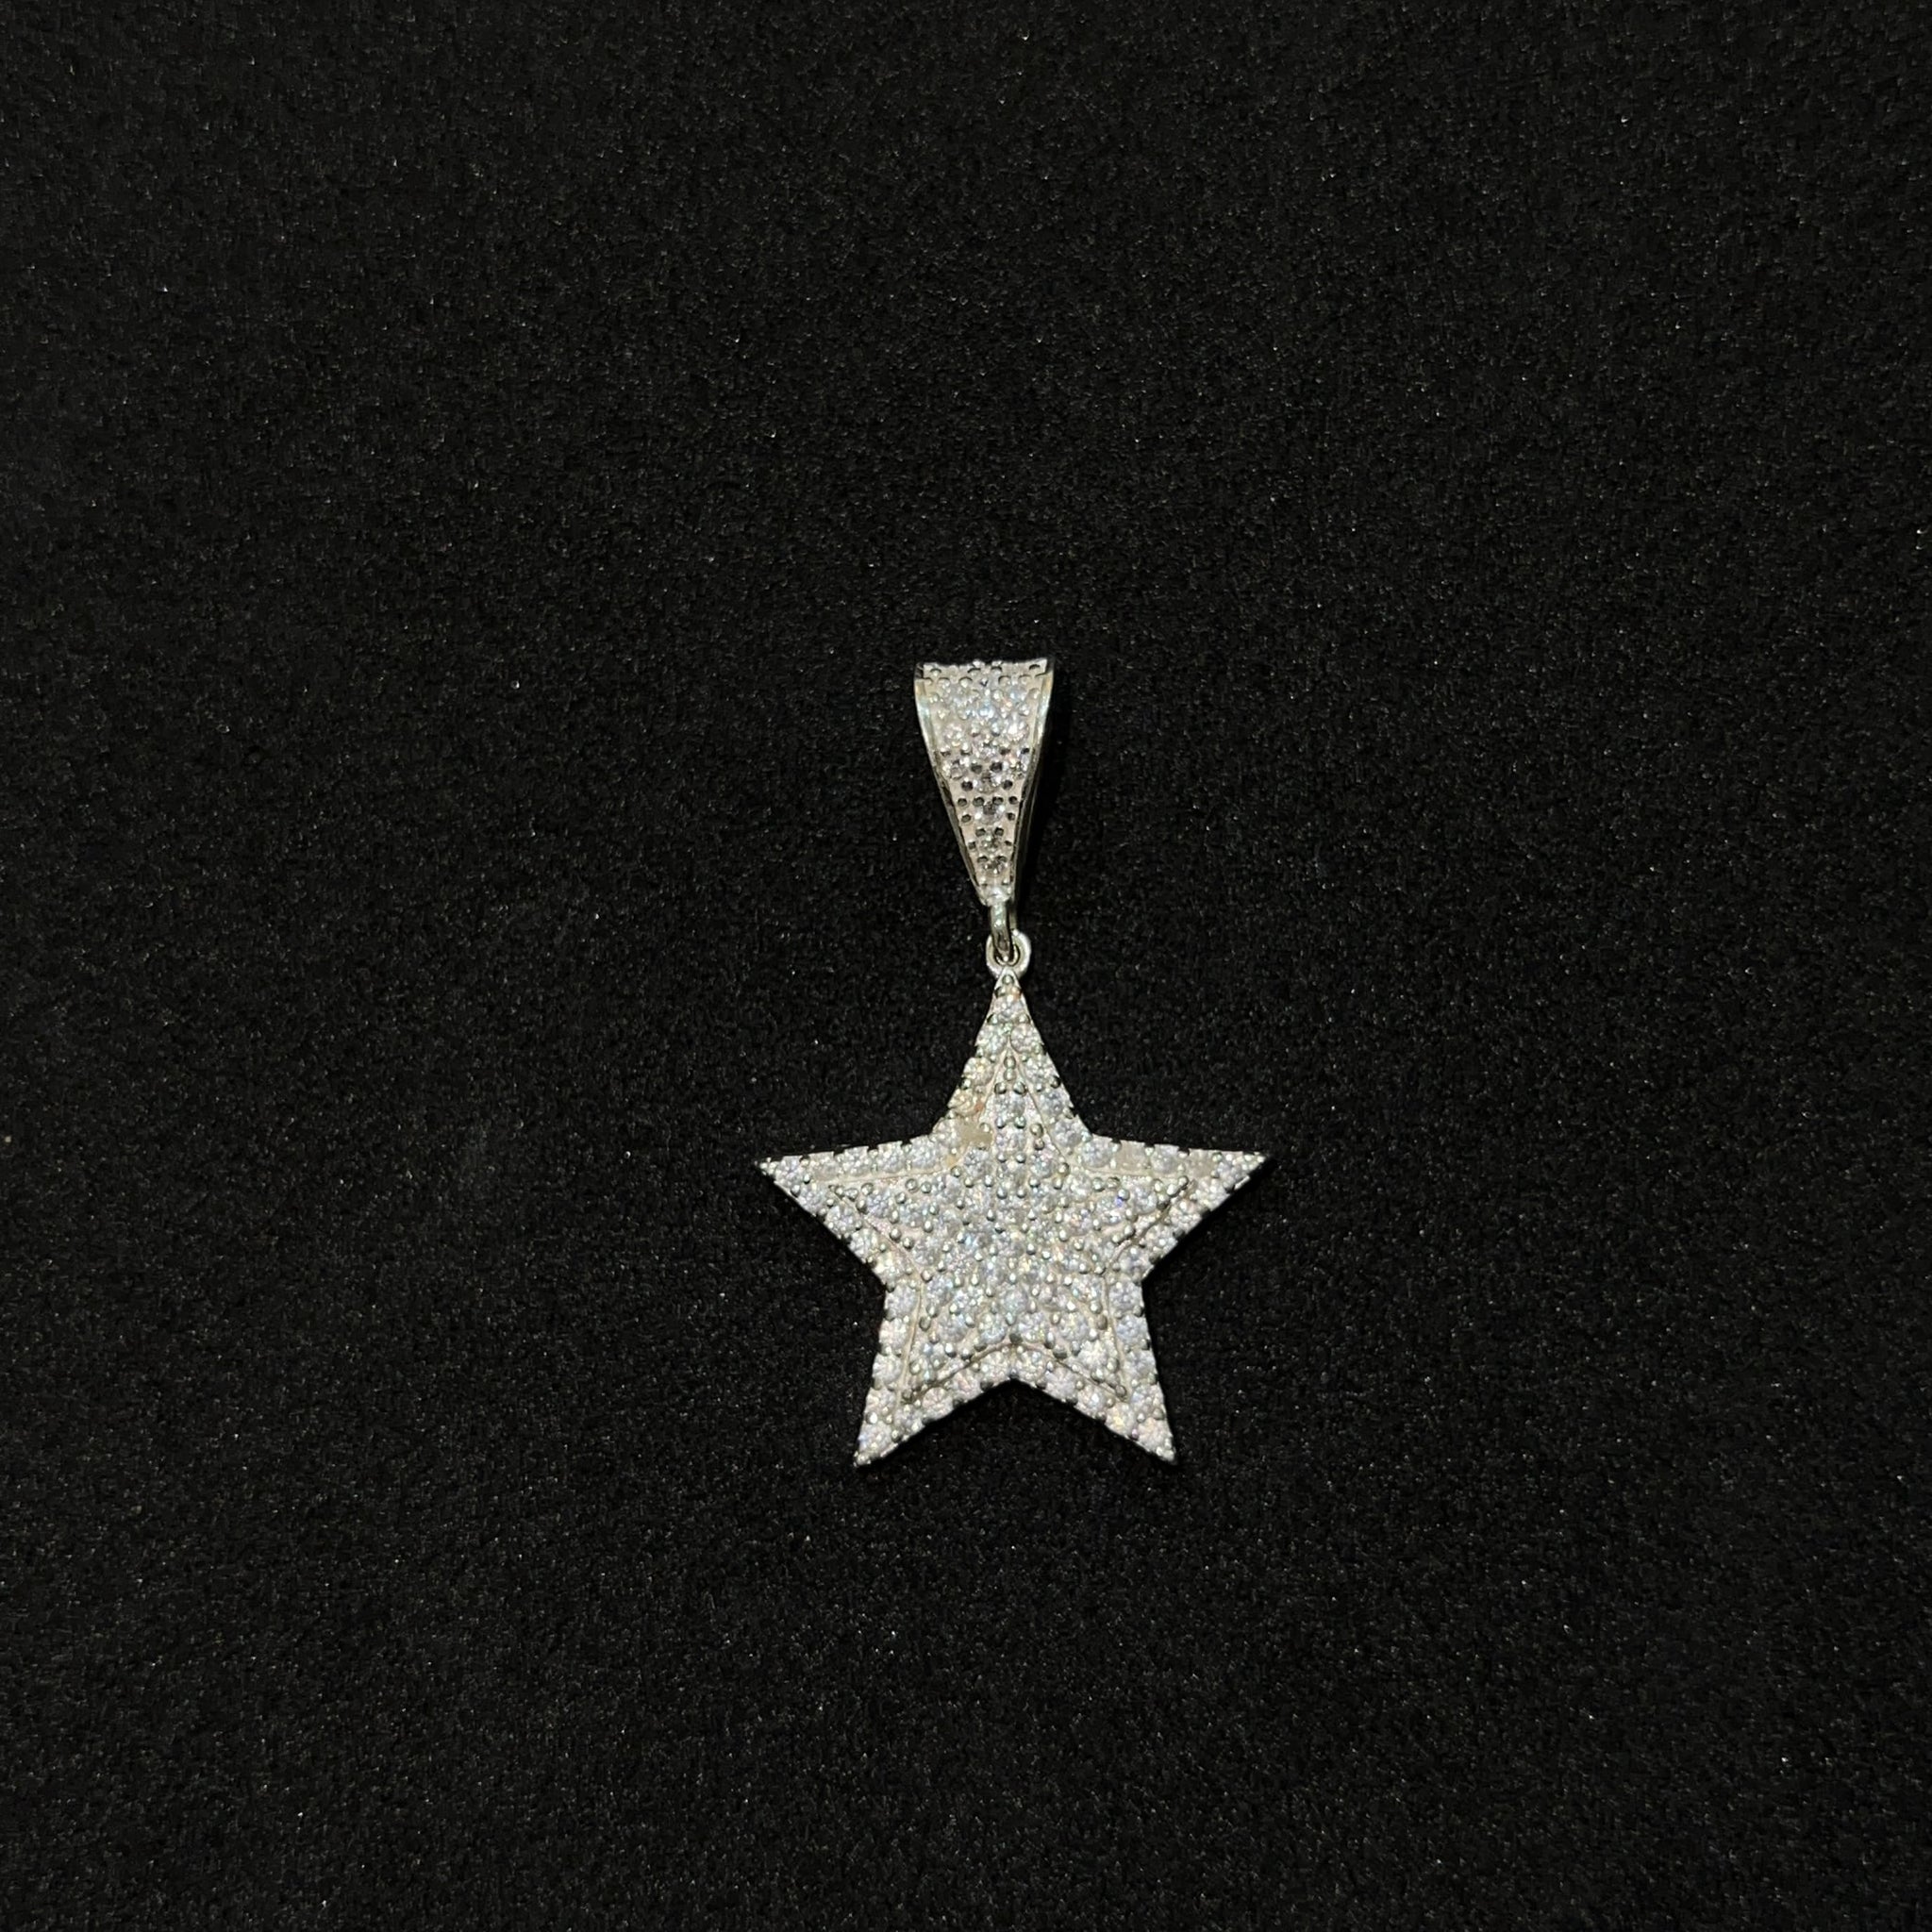 Mini Star Pendant - Iced Out - Silver 925